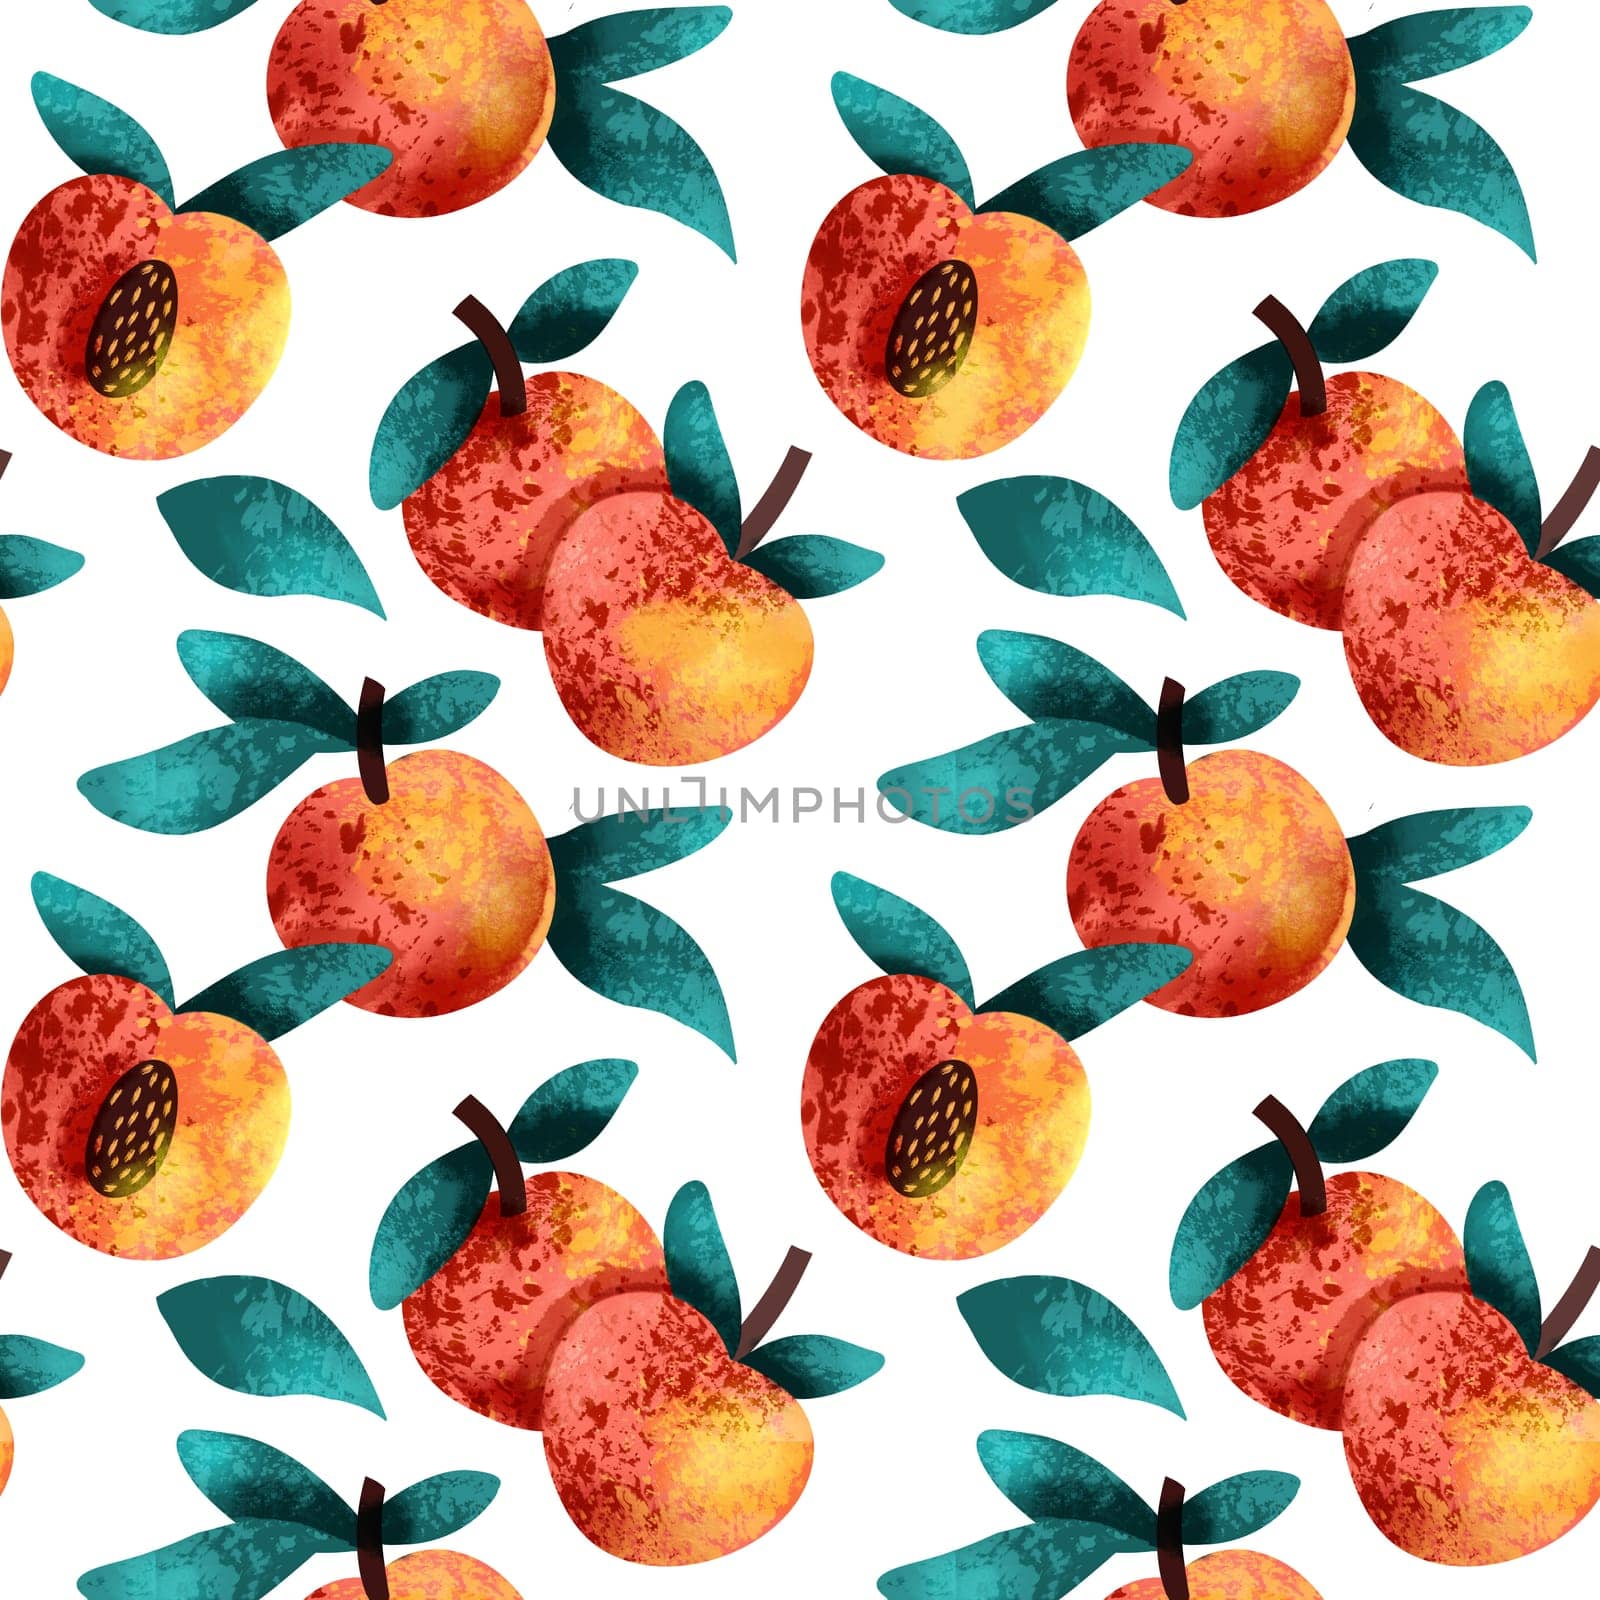 seamless pattern with peach fruits. Hand-drawn textured pattern with peaches